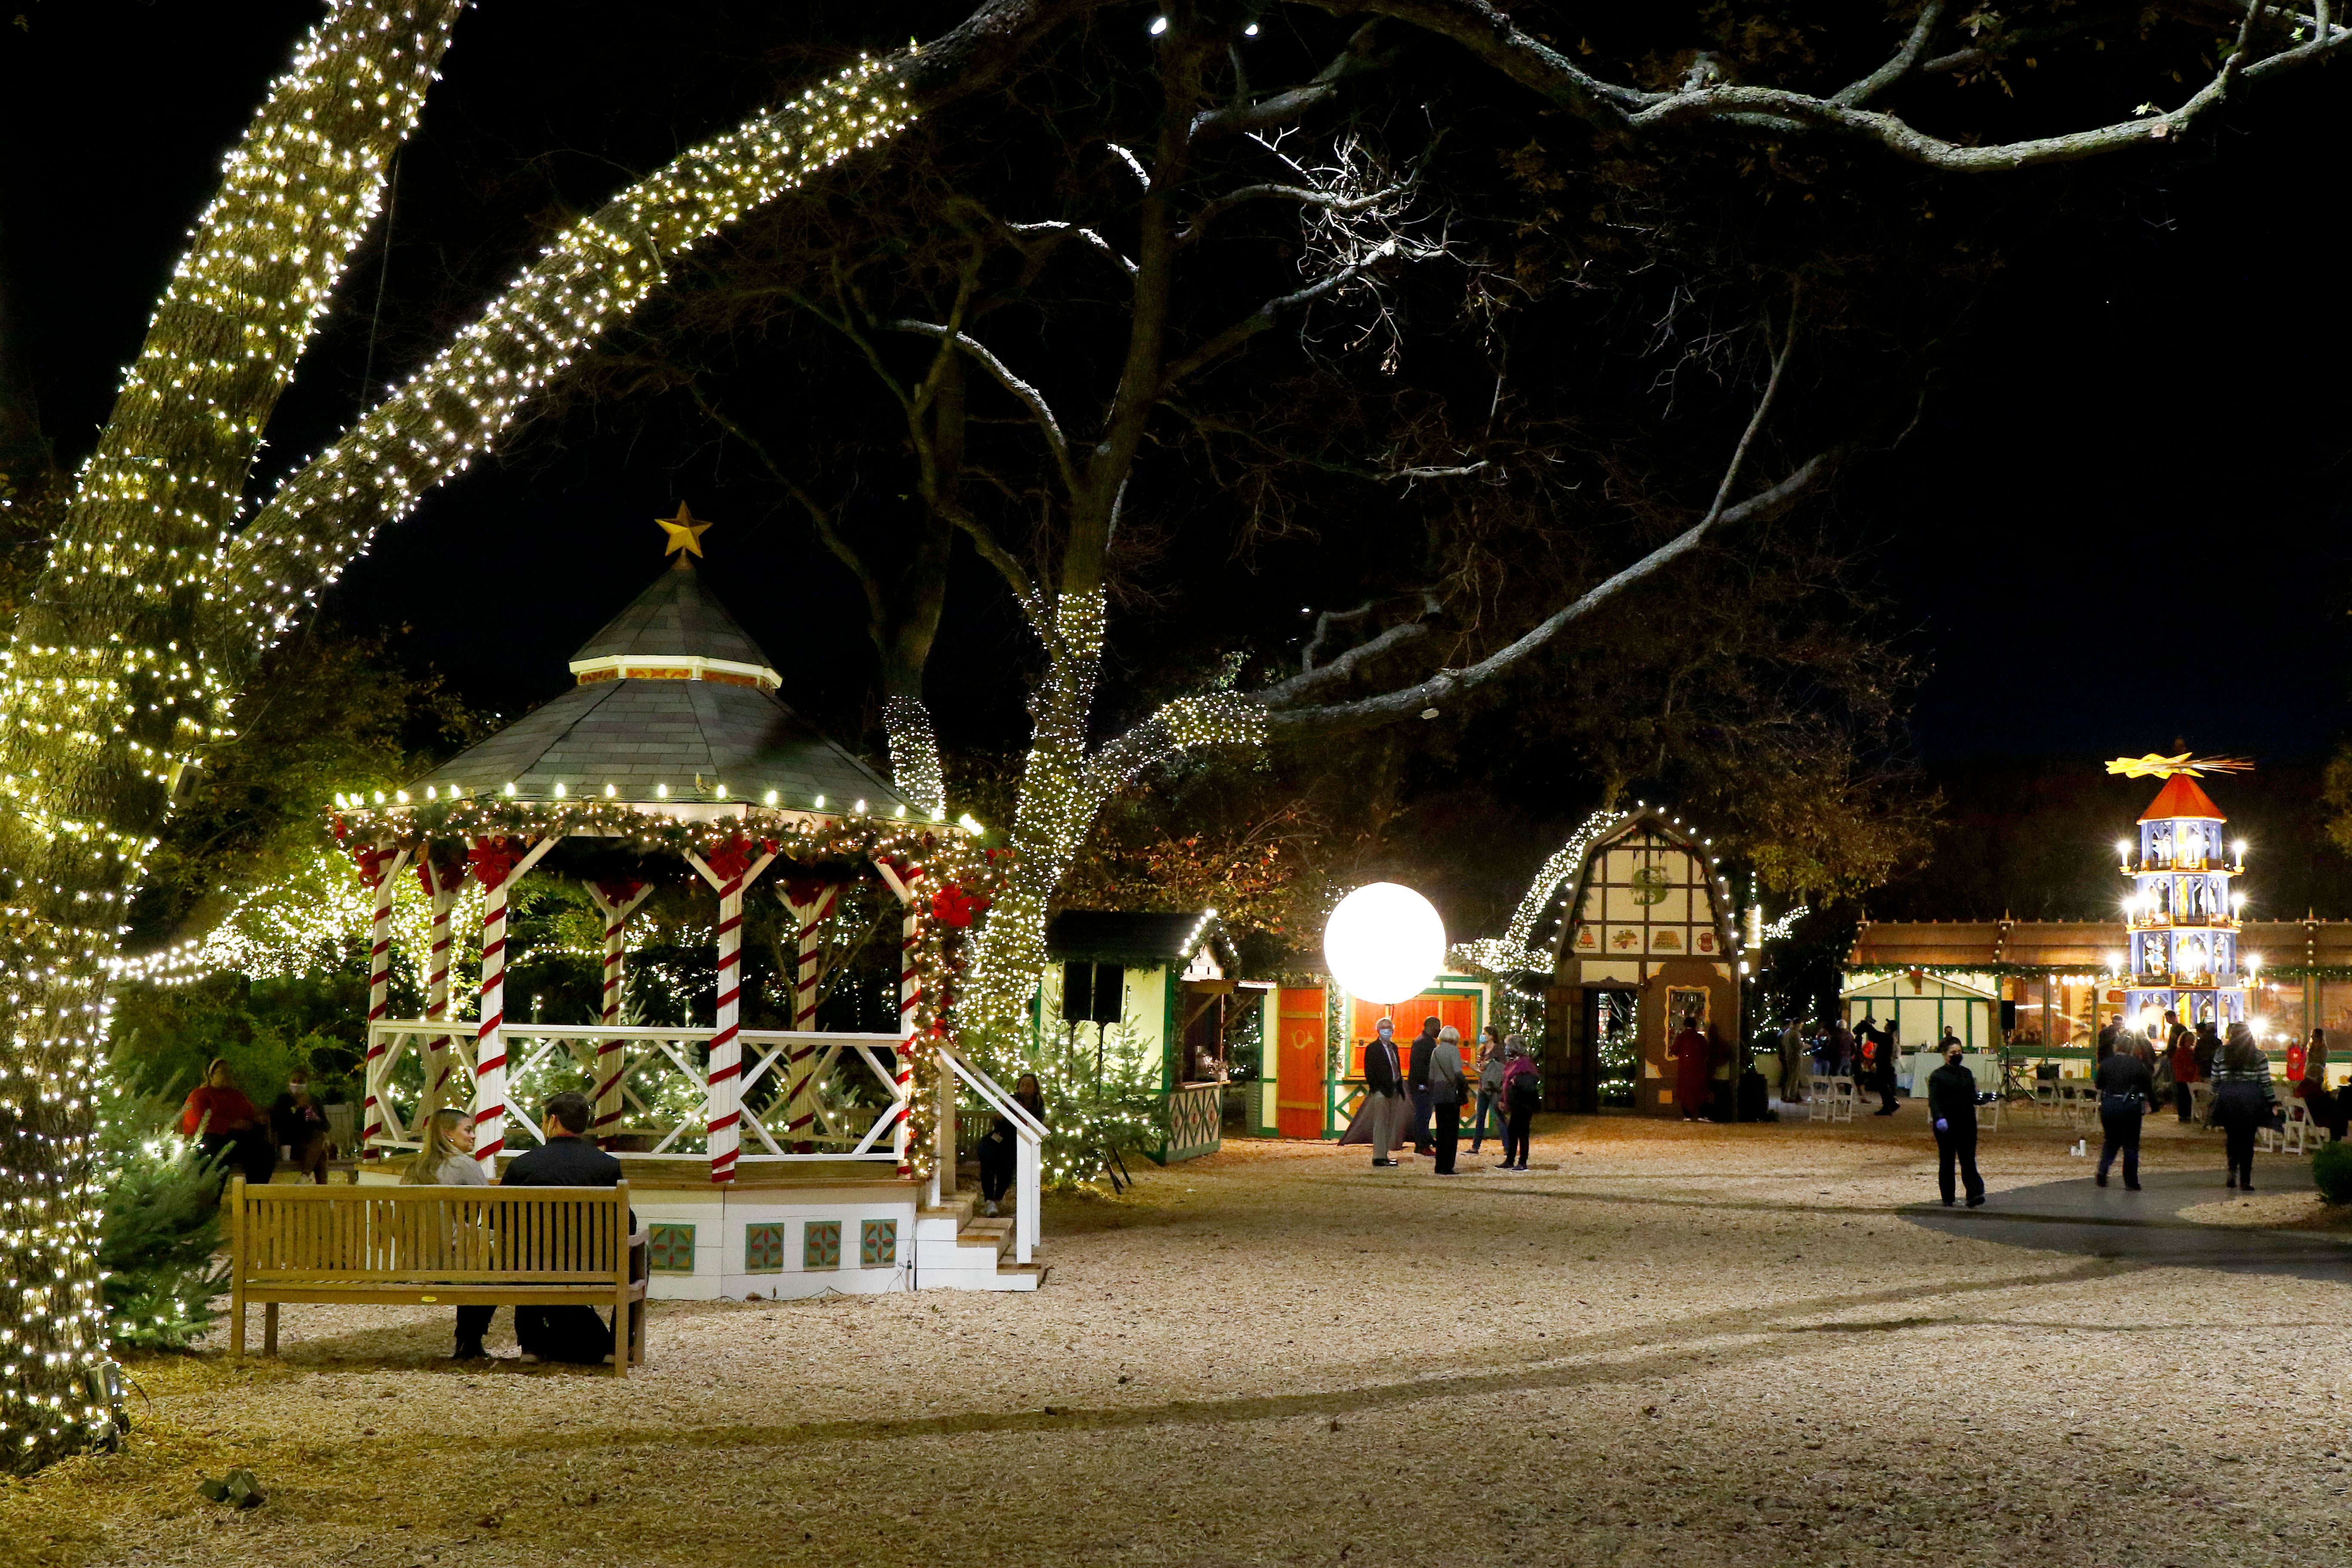 A nighttime view of Dallas Arboretum's Christmas Village. Holiday lights decorate European style buildings